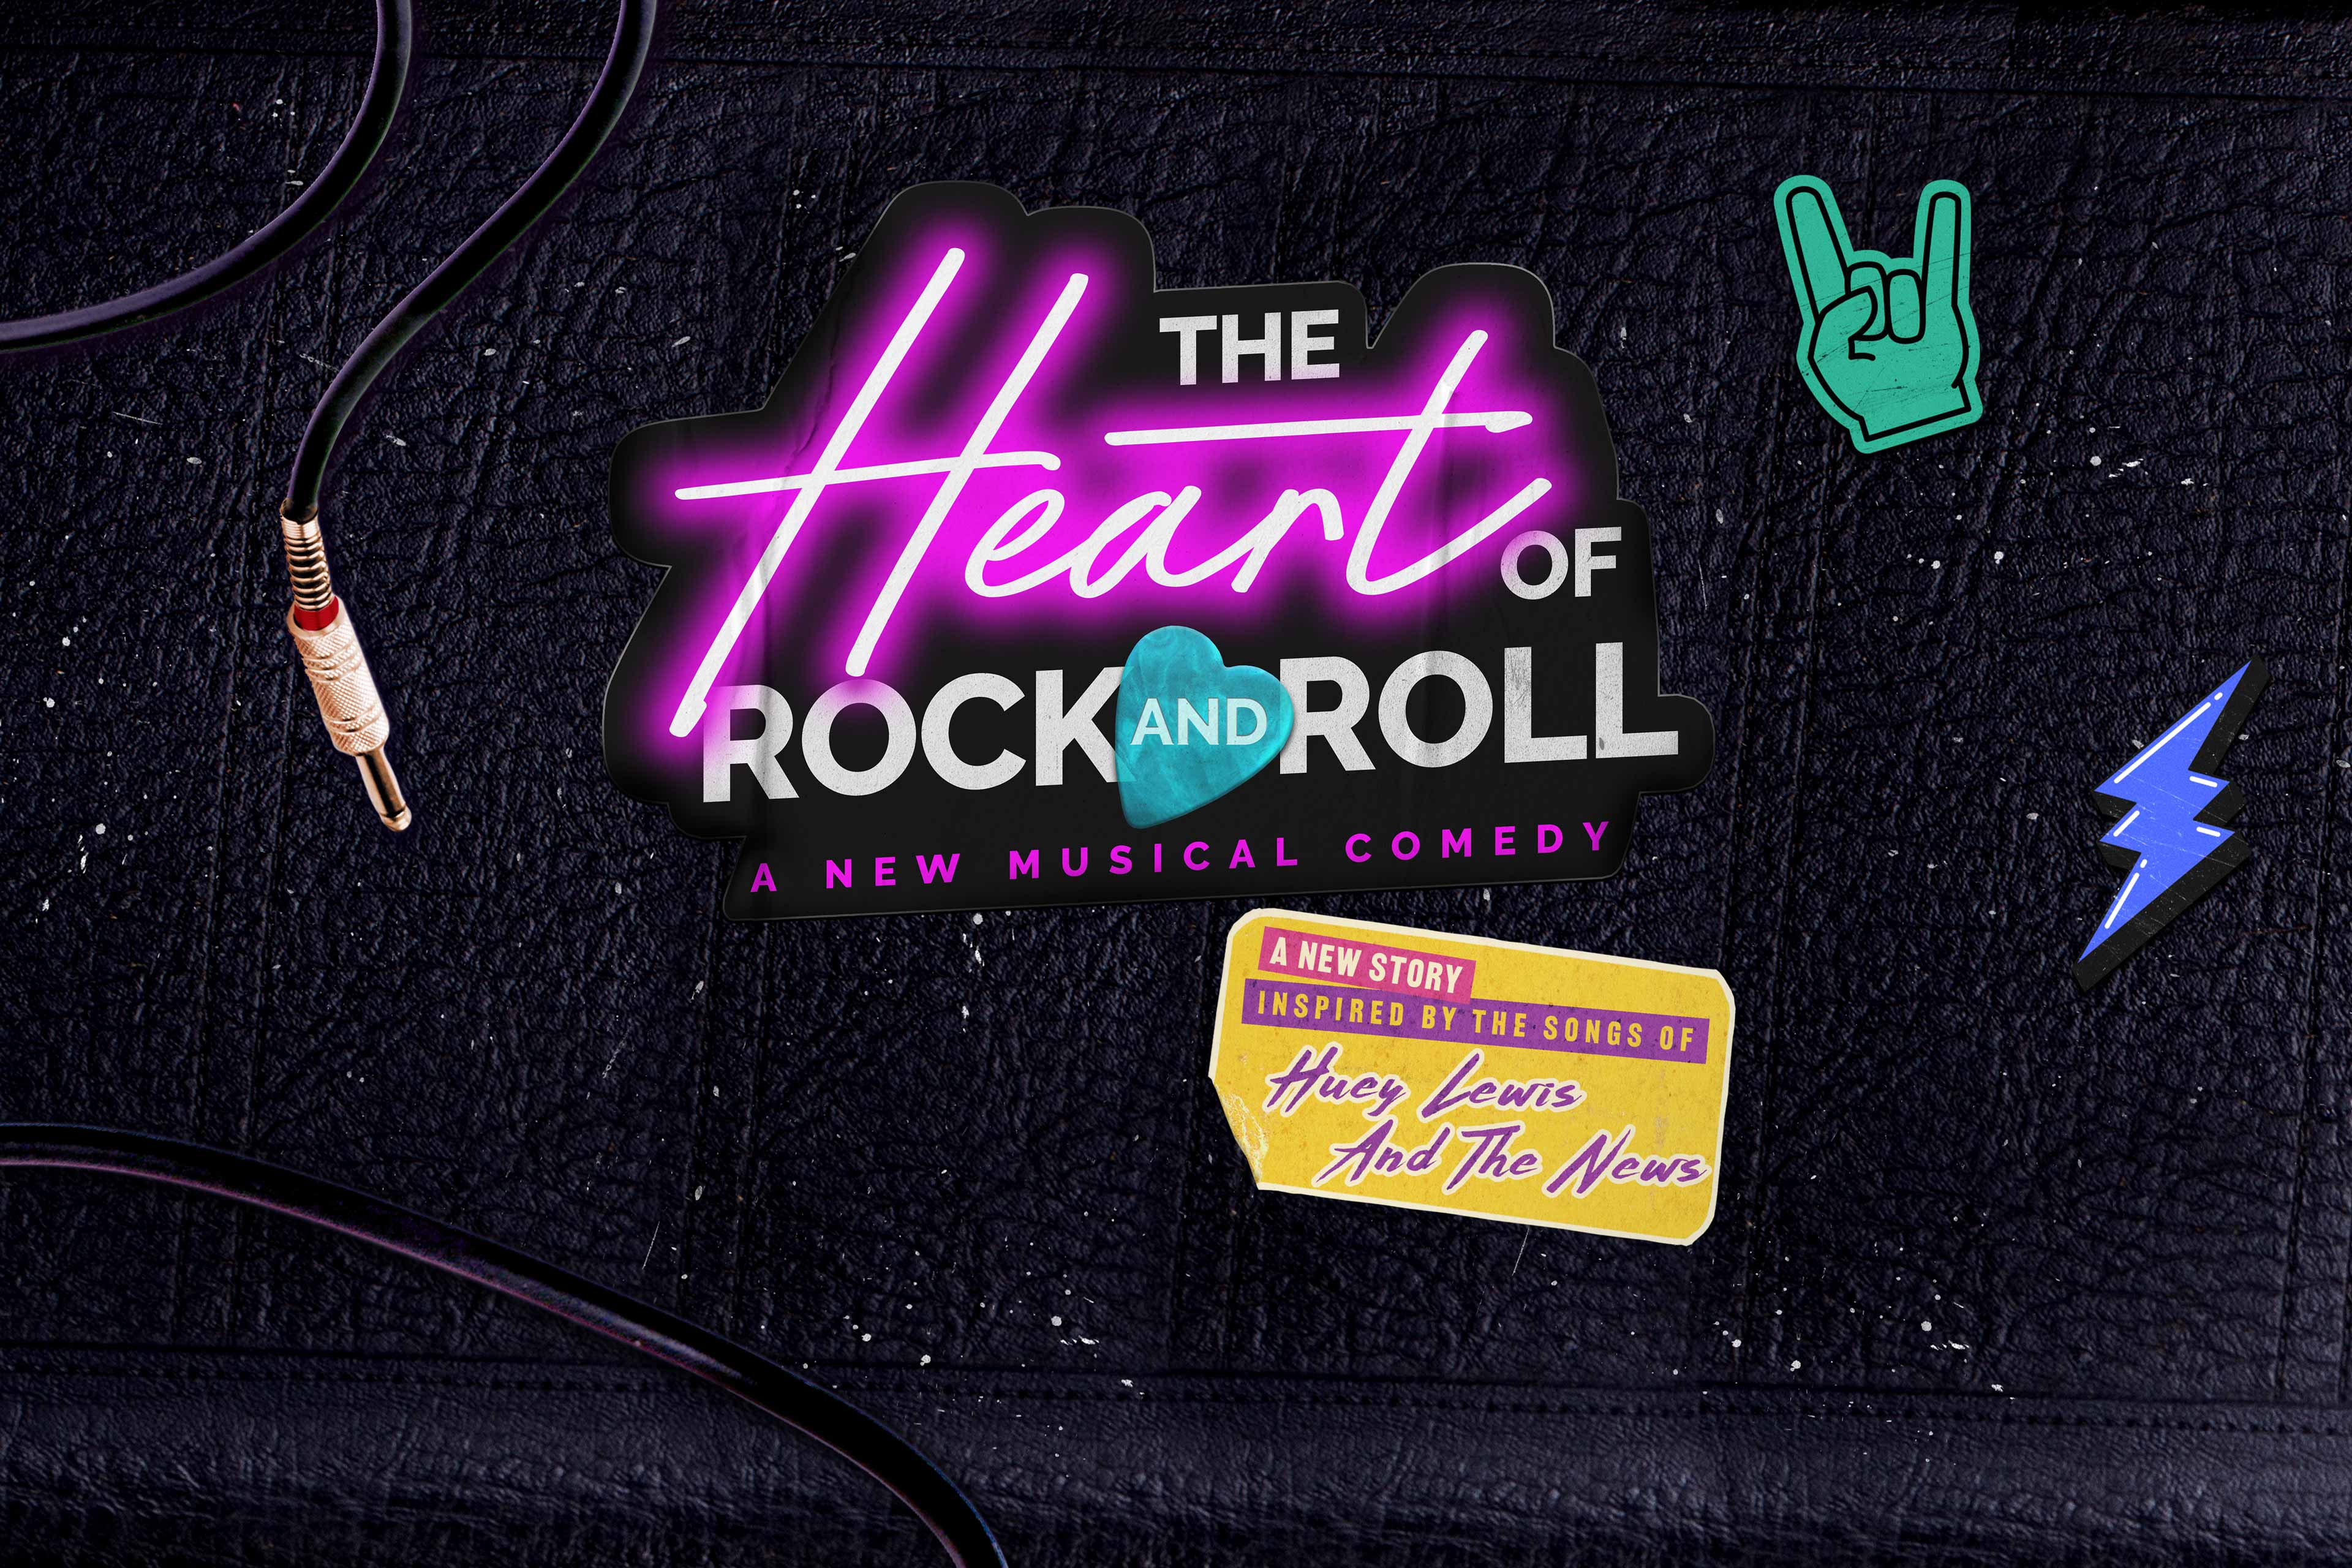 Heart of Rock and Roll - A New Musical